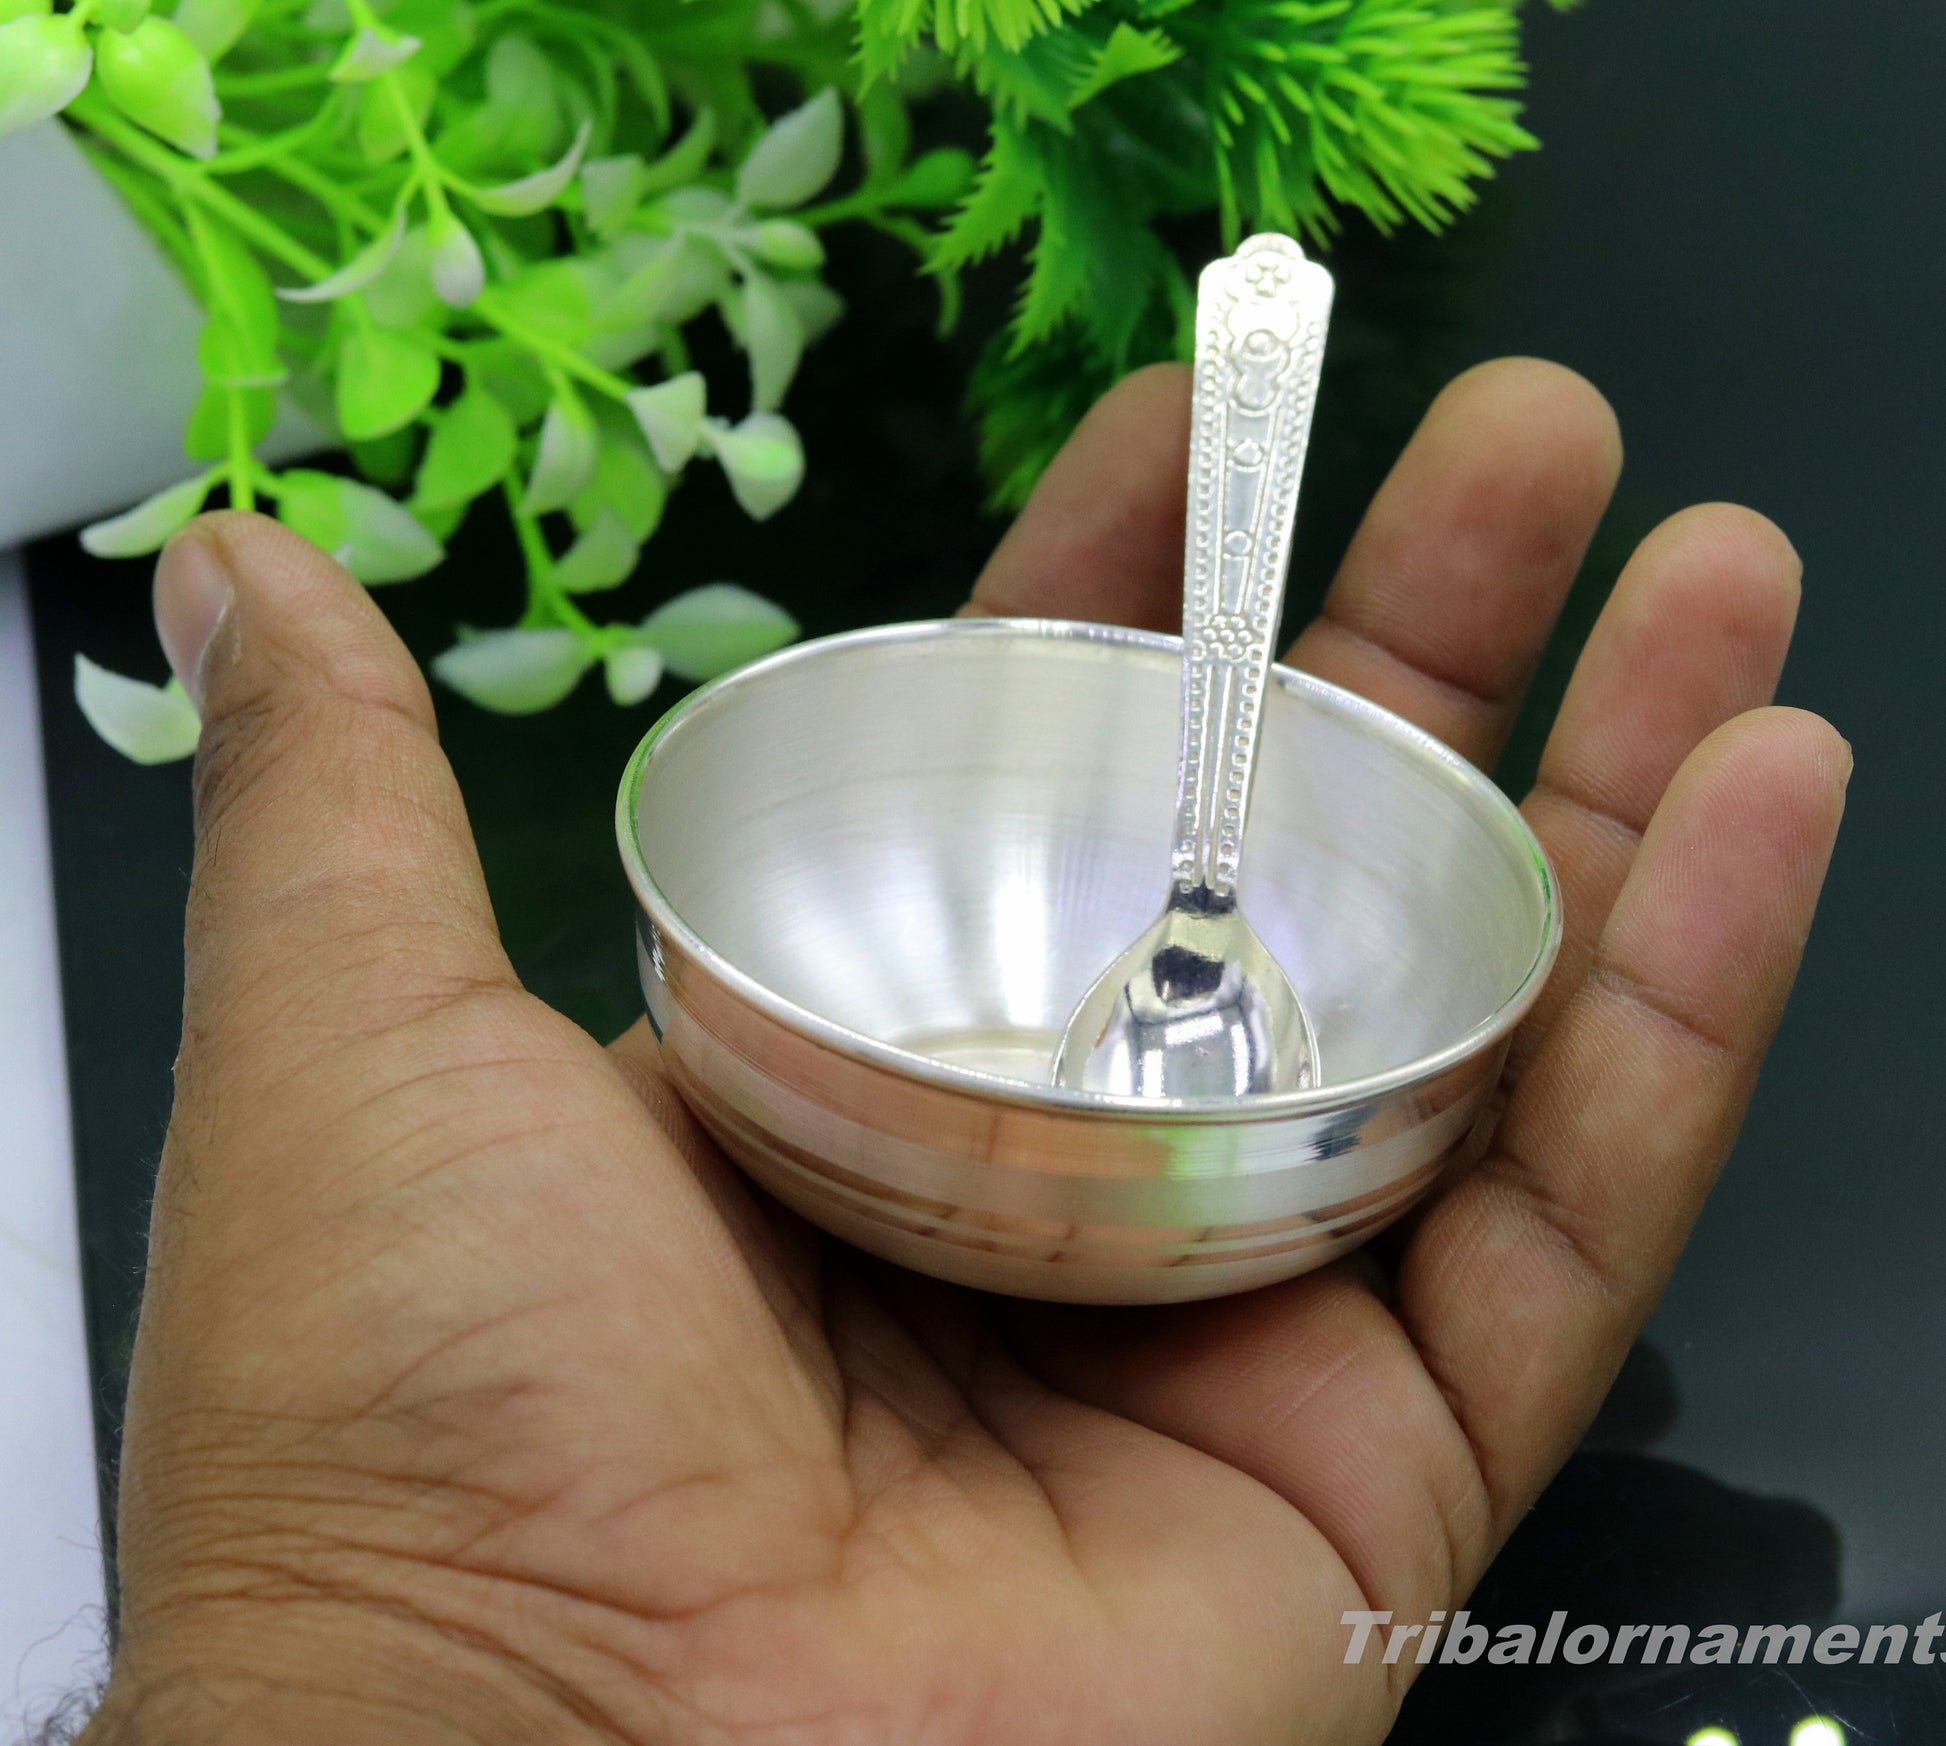 999 fine silver handmade small bowl for baby feeding bowl, pure silver vessels, silver utensils, home and kitchen accessories india sv40 - TRIBAL ORNAMENTS